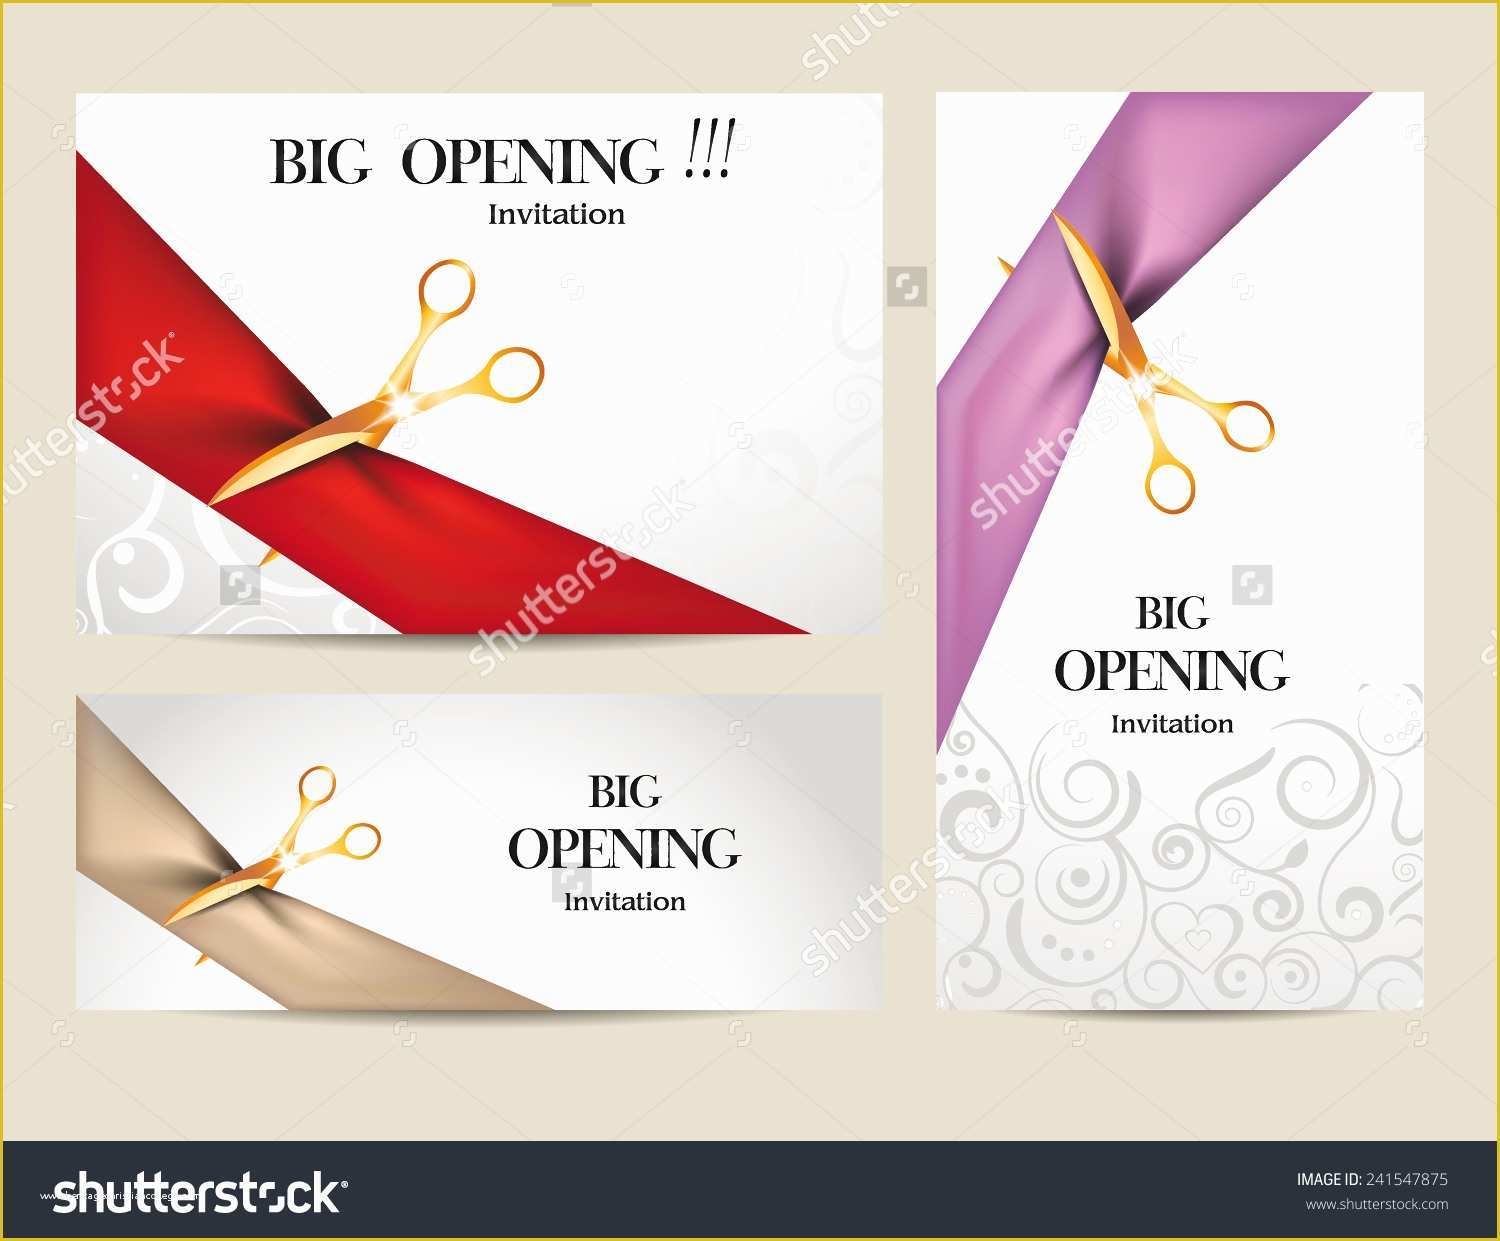 Grand Opening Invitation Template Free Of Grand Opening Invitations Free Printable No Objection